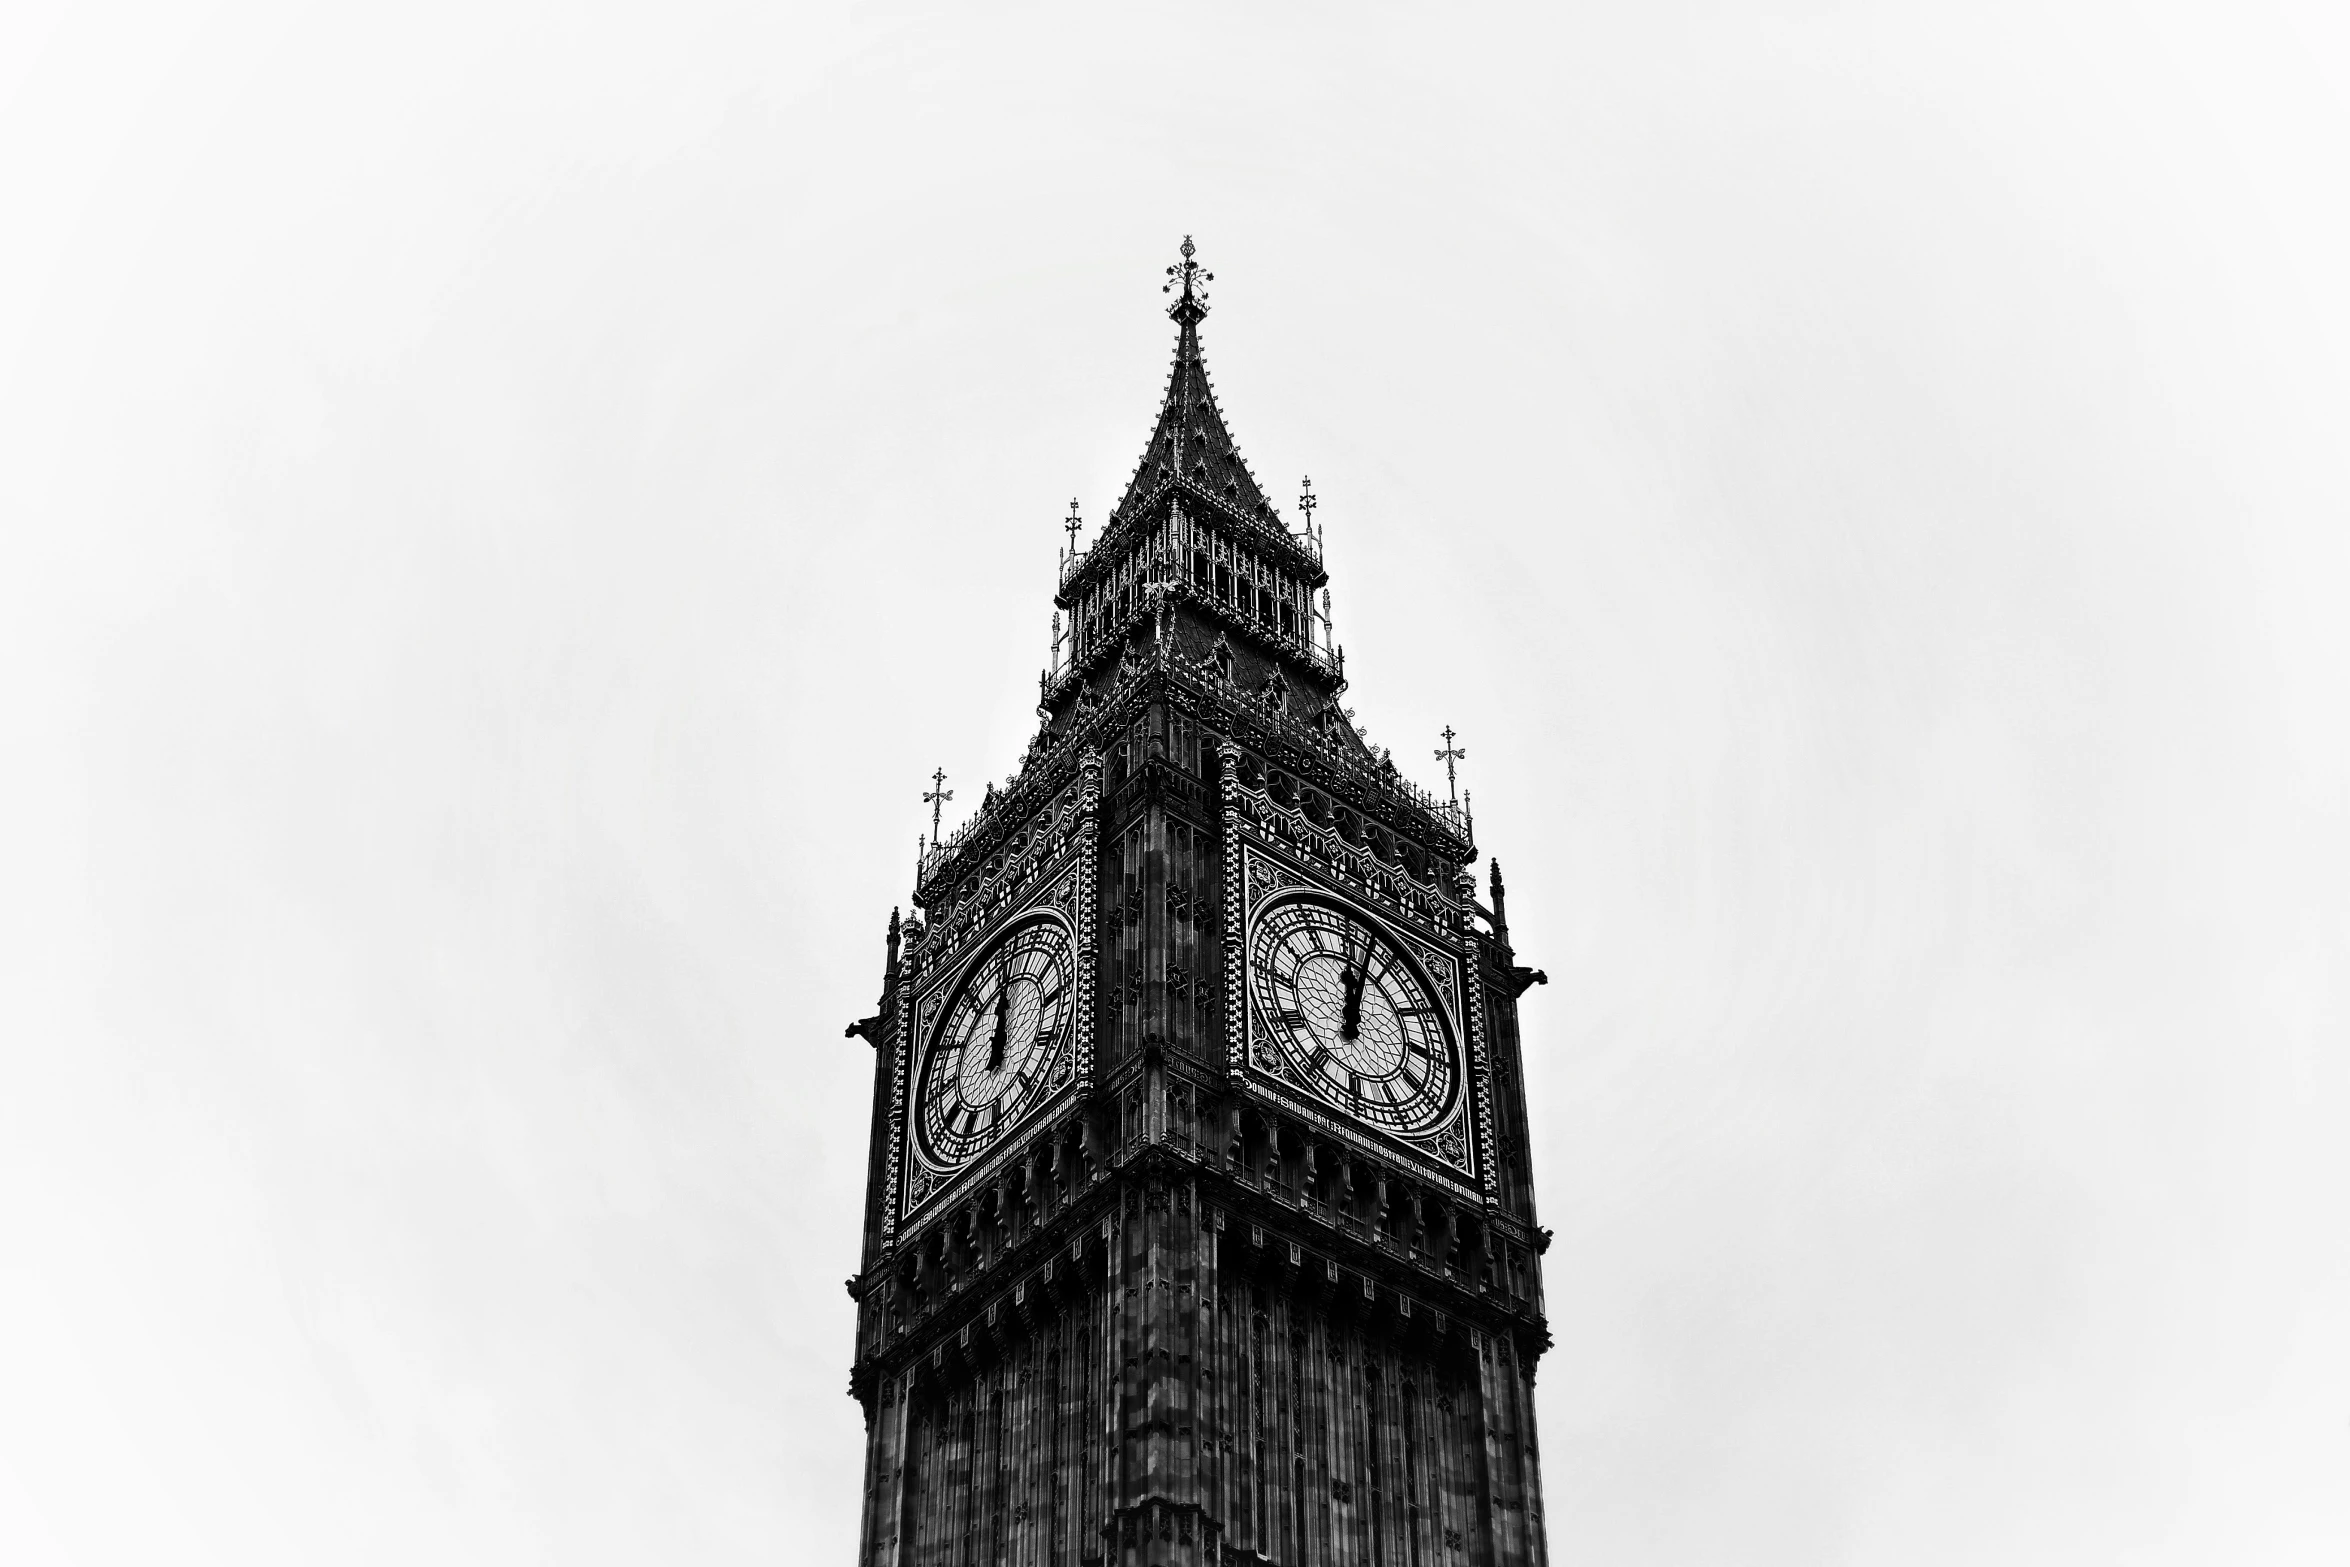 a large black clock tower in a big city